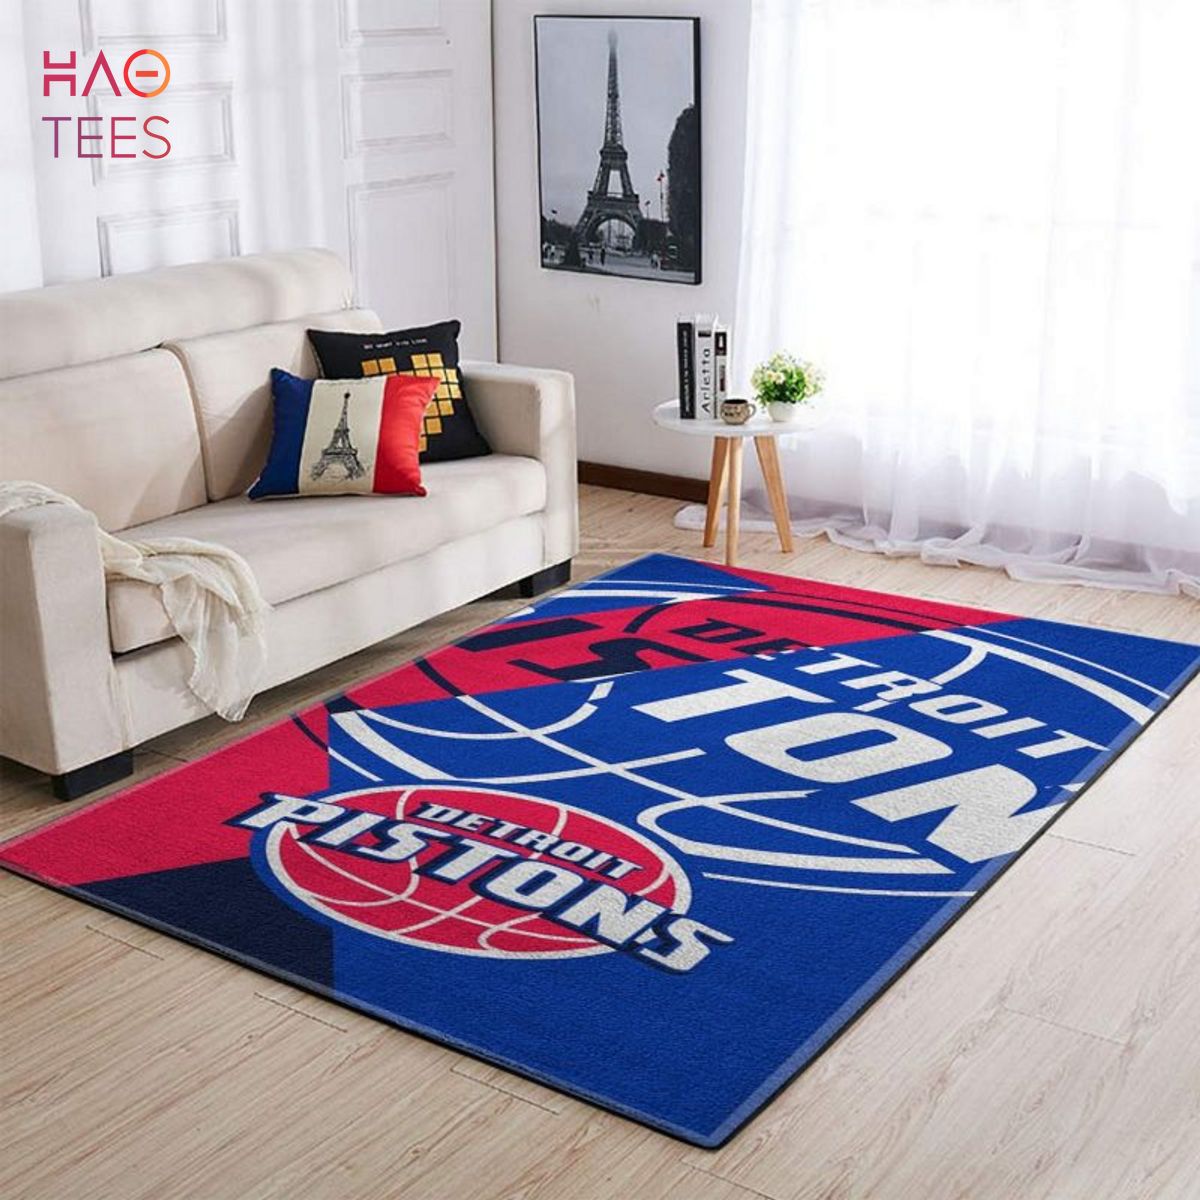 BEST Detroit Pistons Limited Edition Rug Carpet Limited Edition